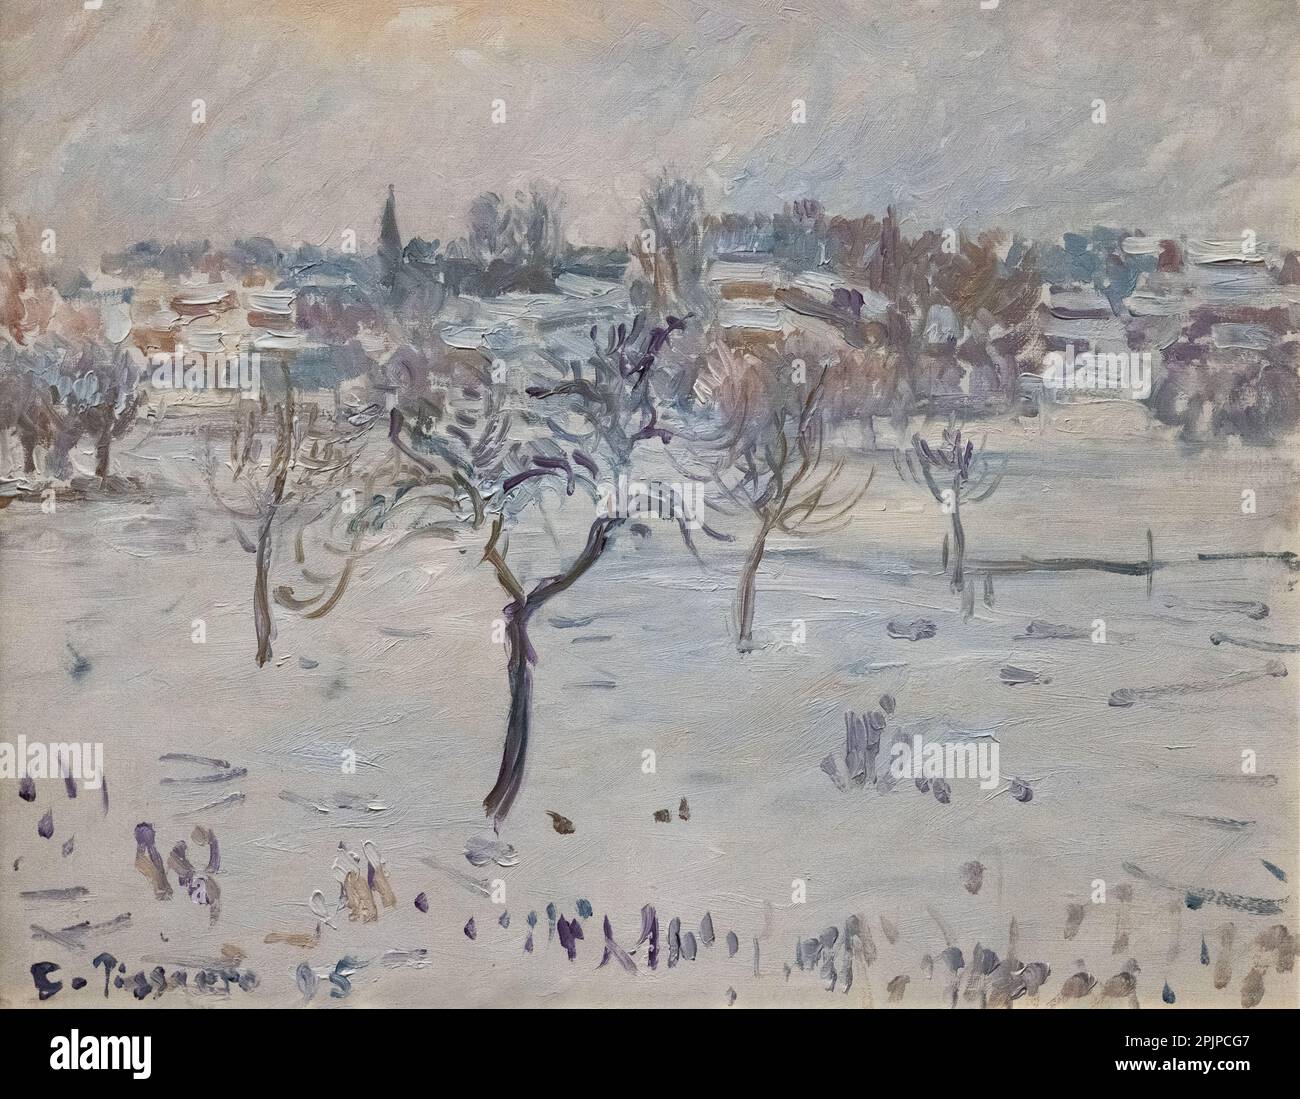 Camille Pissarro painting; Snowy landscape at Eragny with an Apple Tree; 1895; 19th century impressionist painter. Winter landscape paintings. Stock Photo